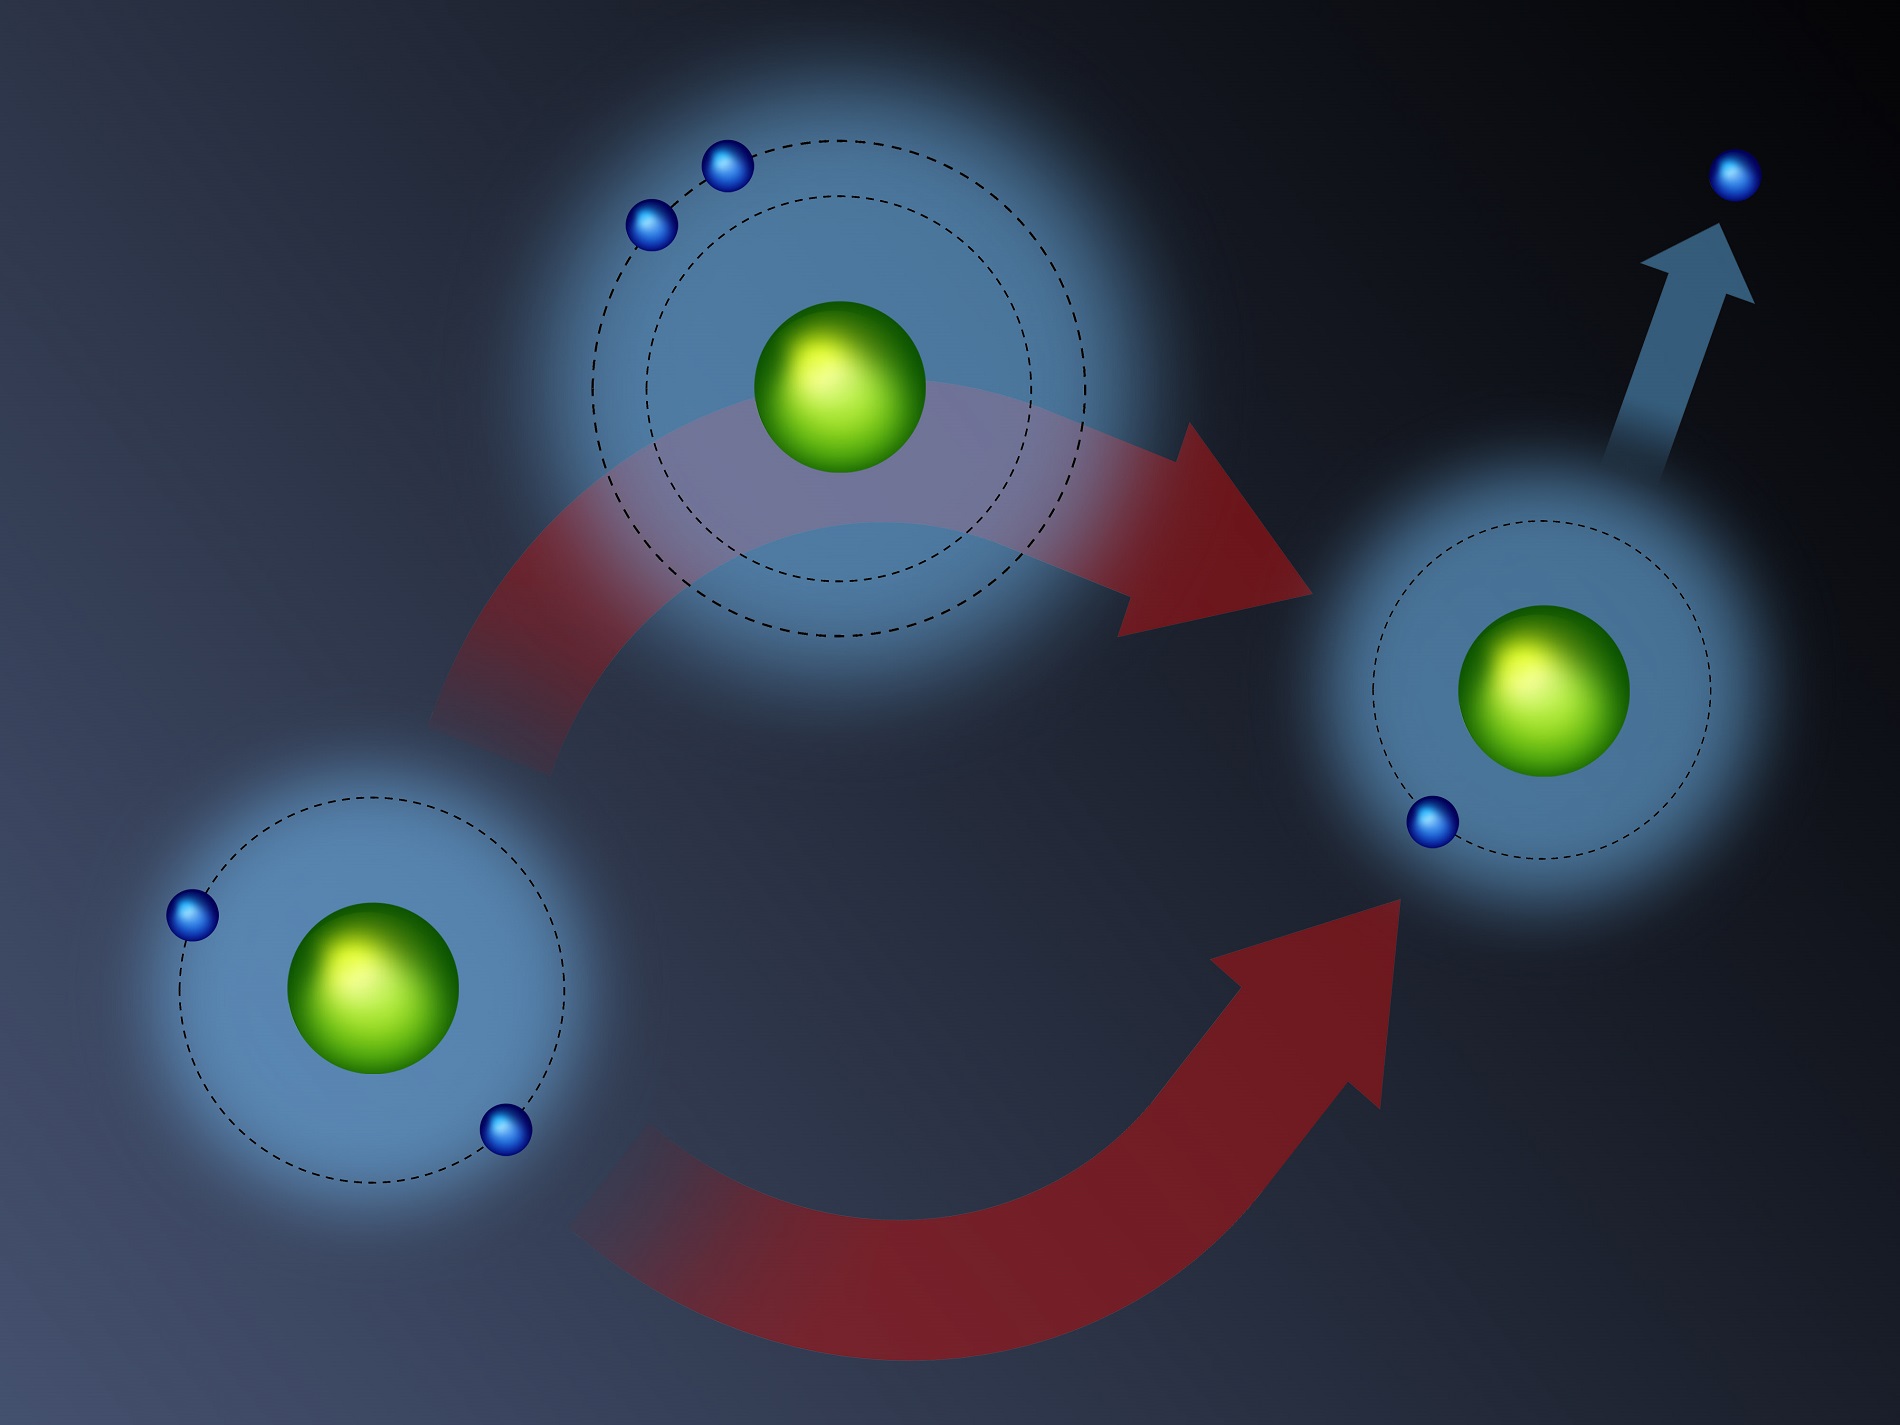 There are two different ways the helium atom can be ionized